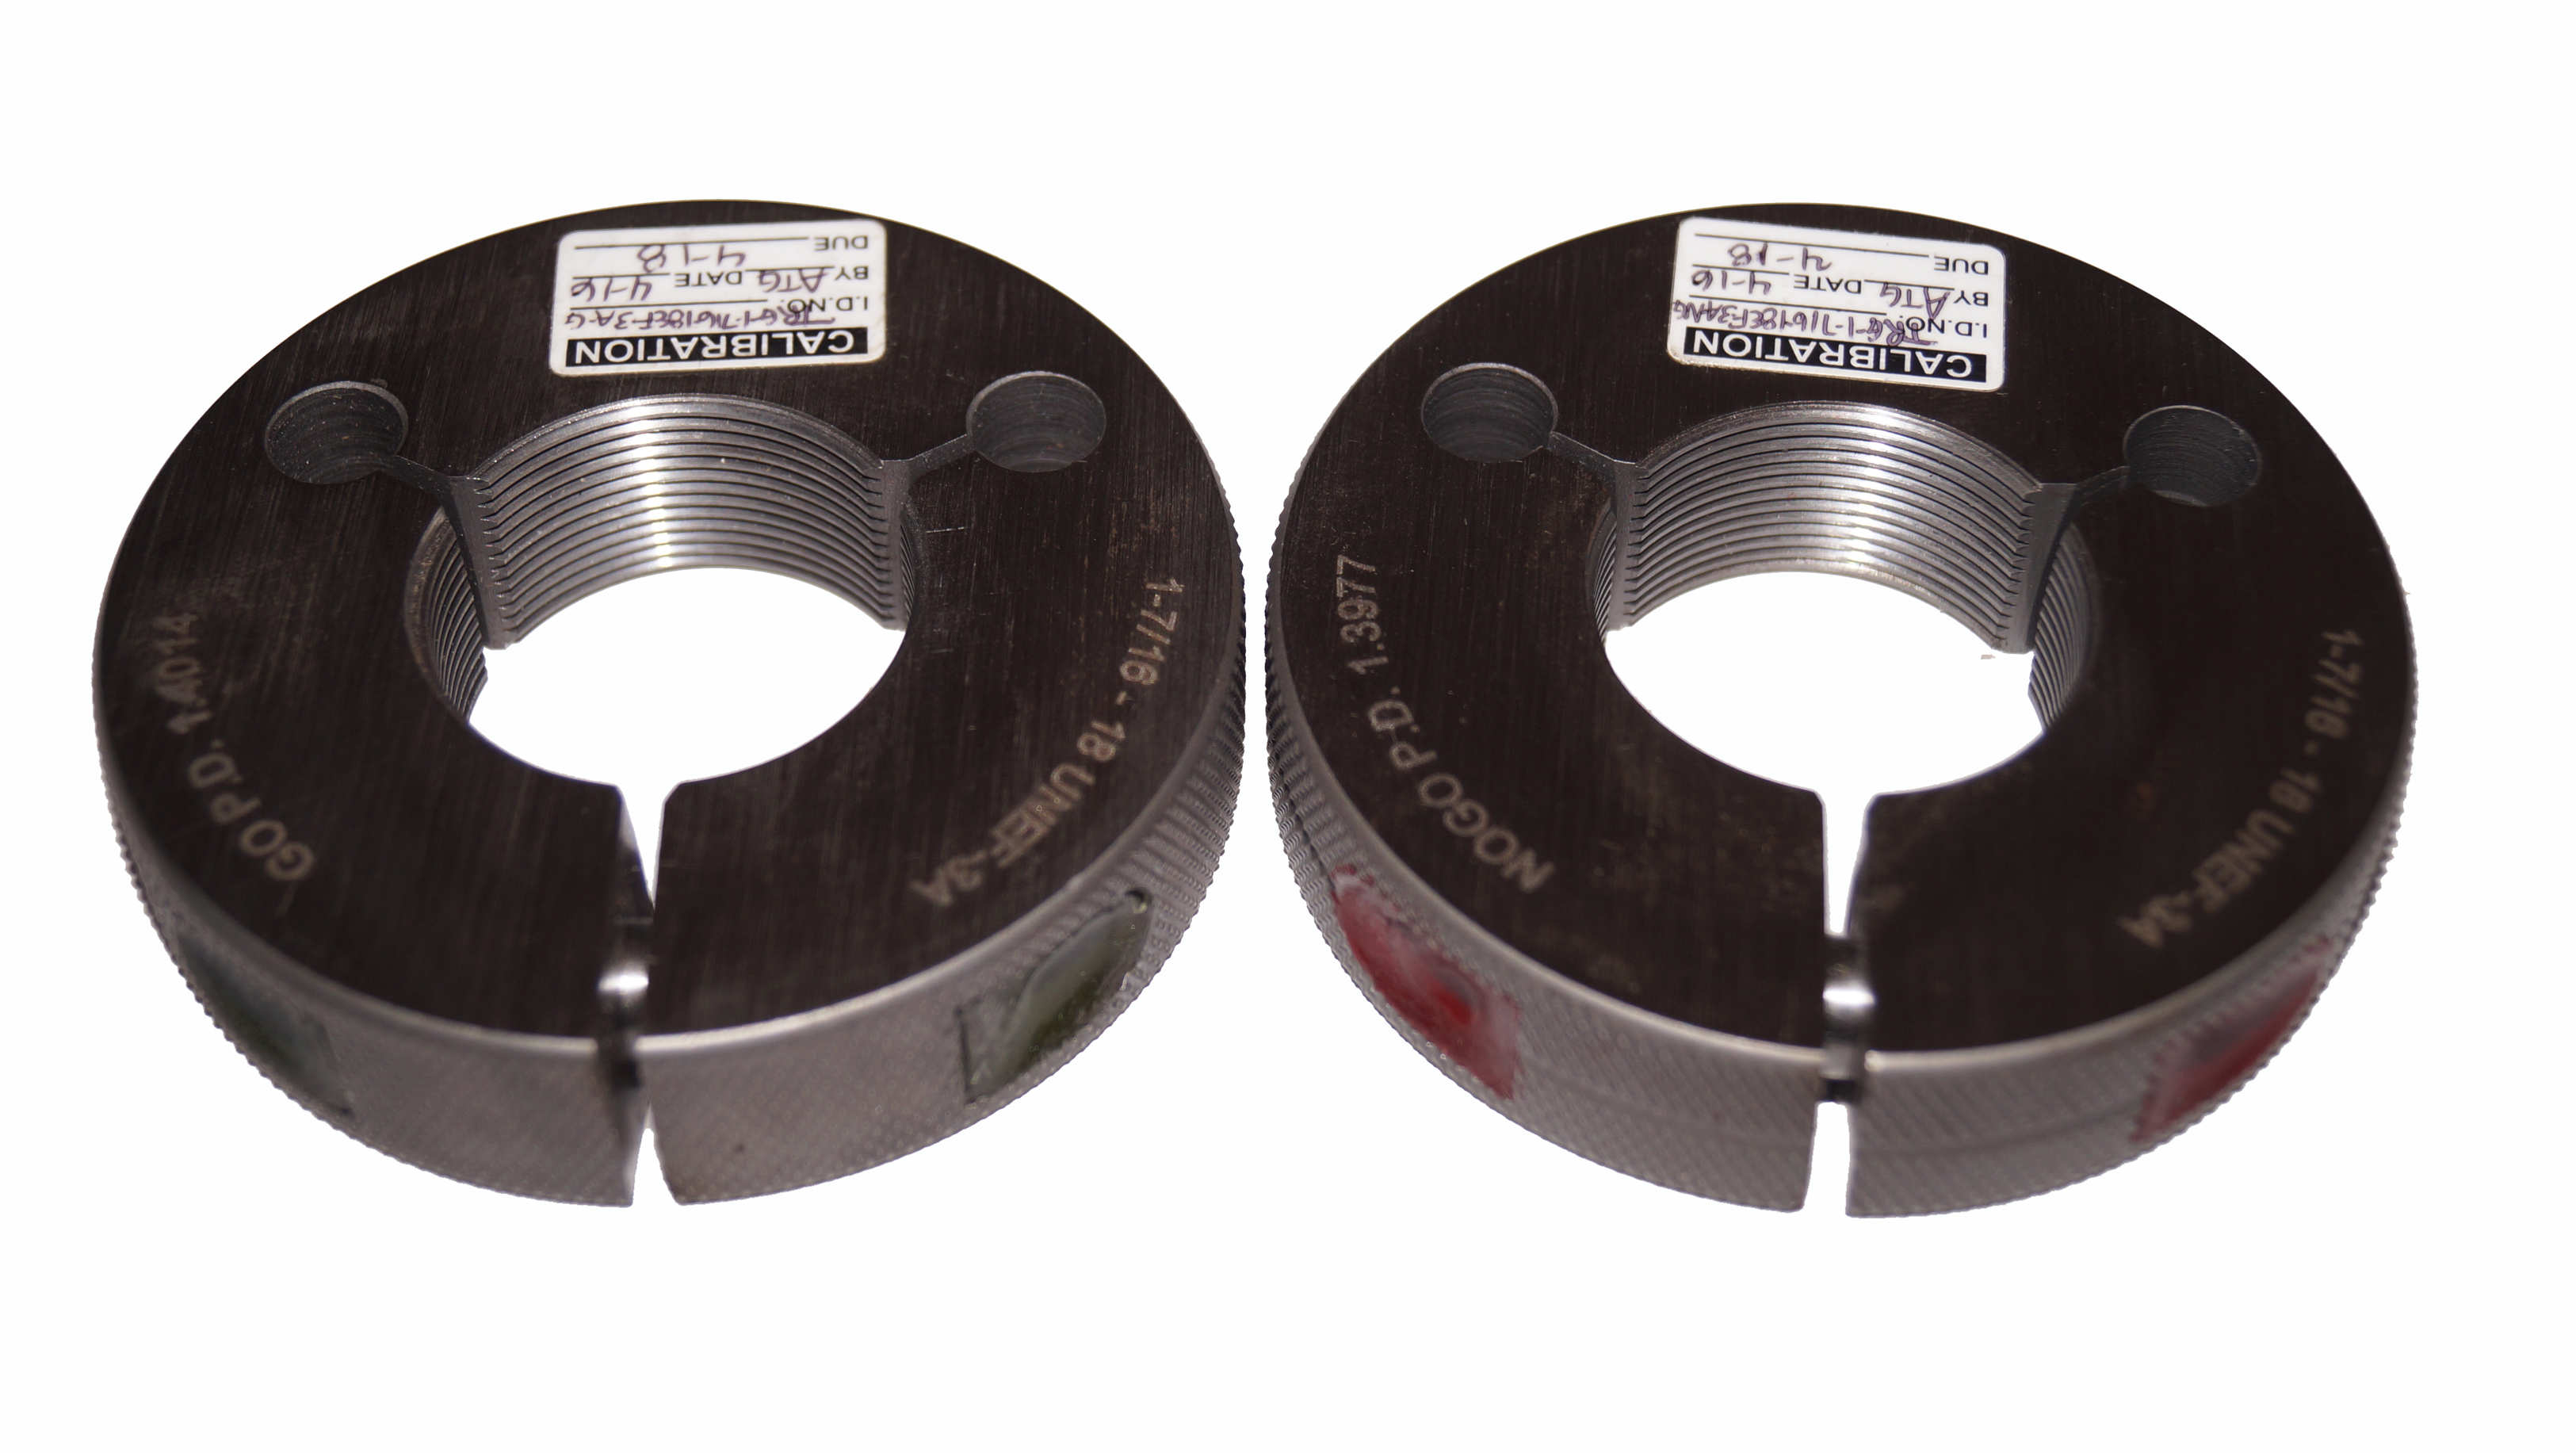 1/2 20 NF 3 THREAD RING GAGES .5 GO NO GO P.D.'S = .4675 & .4649 UNF-3 CHECK